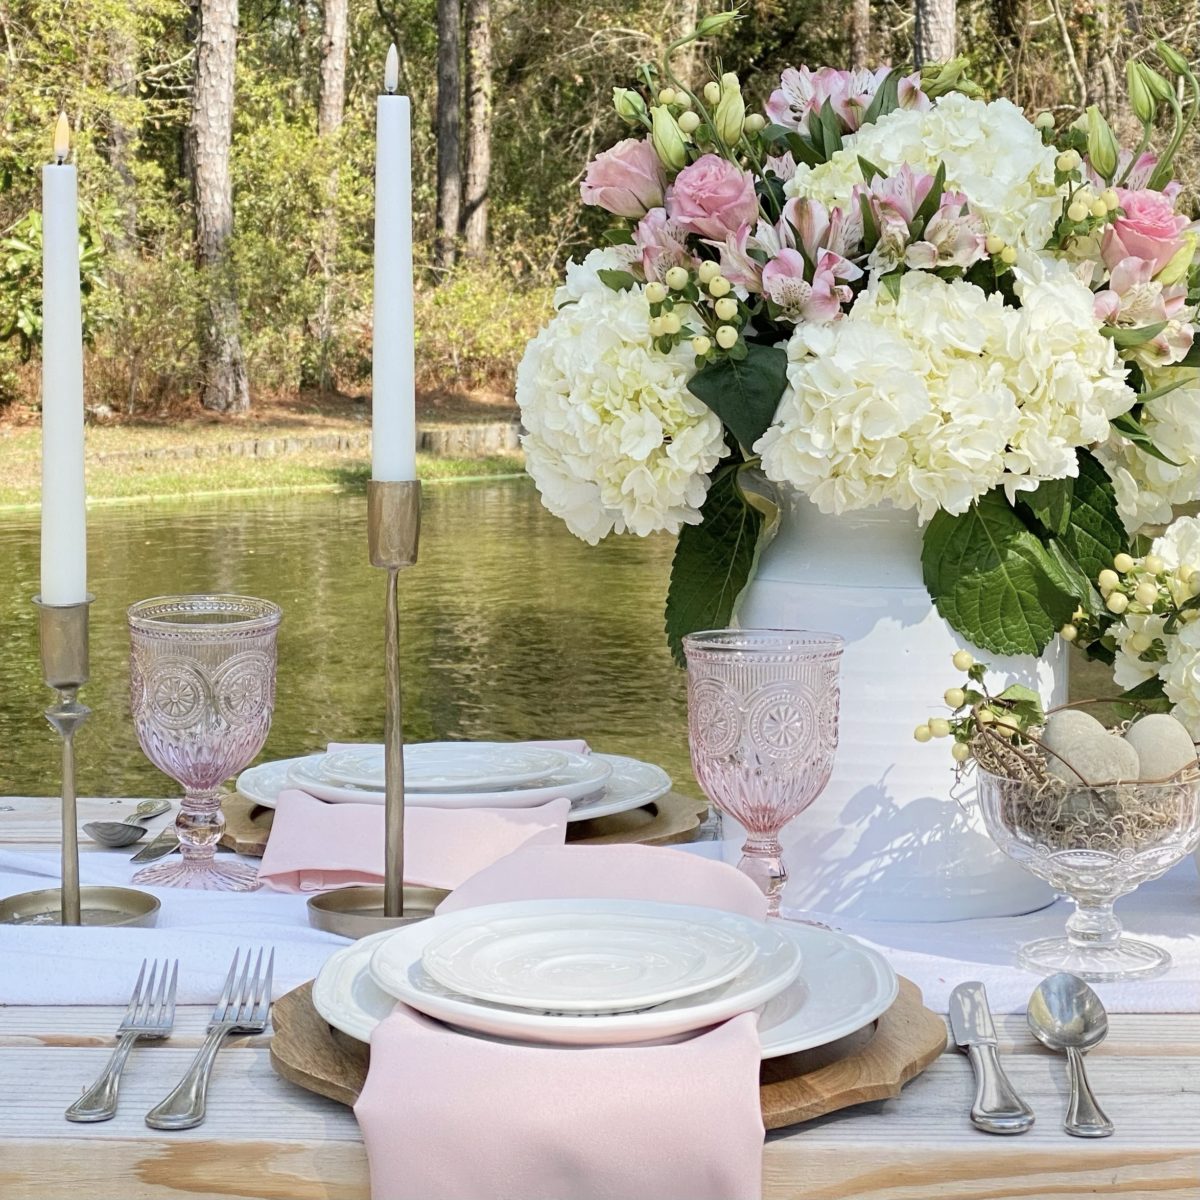 Simple spring table set by the pond.